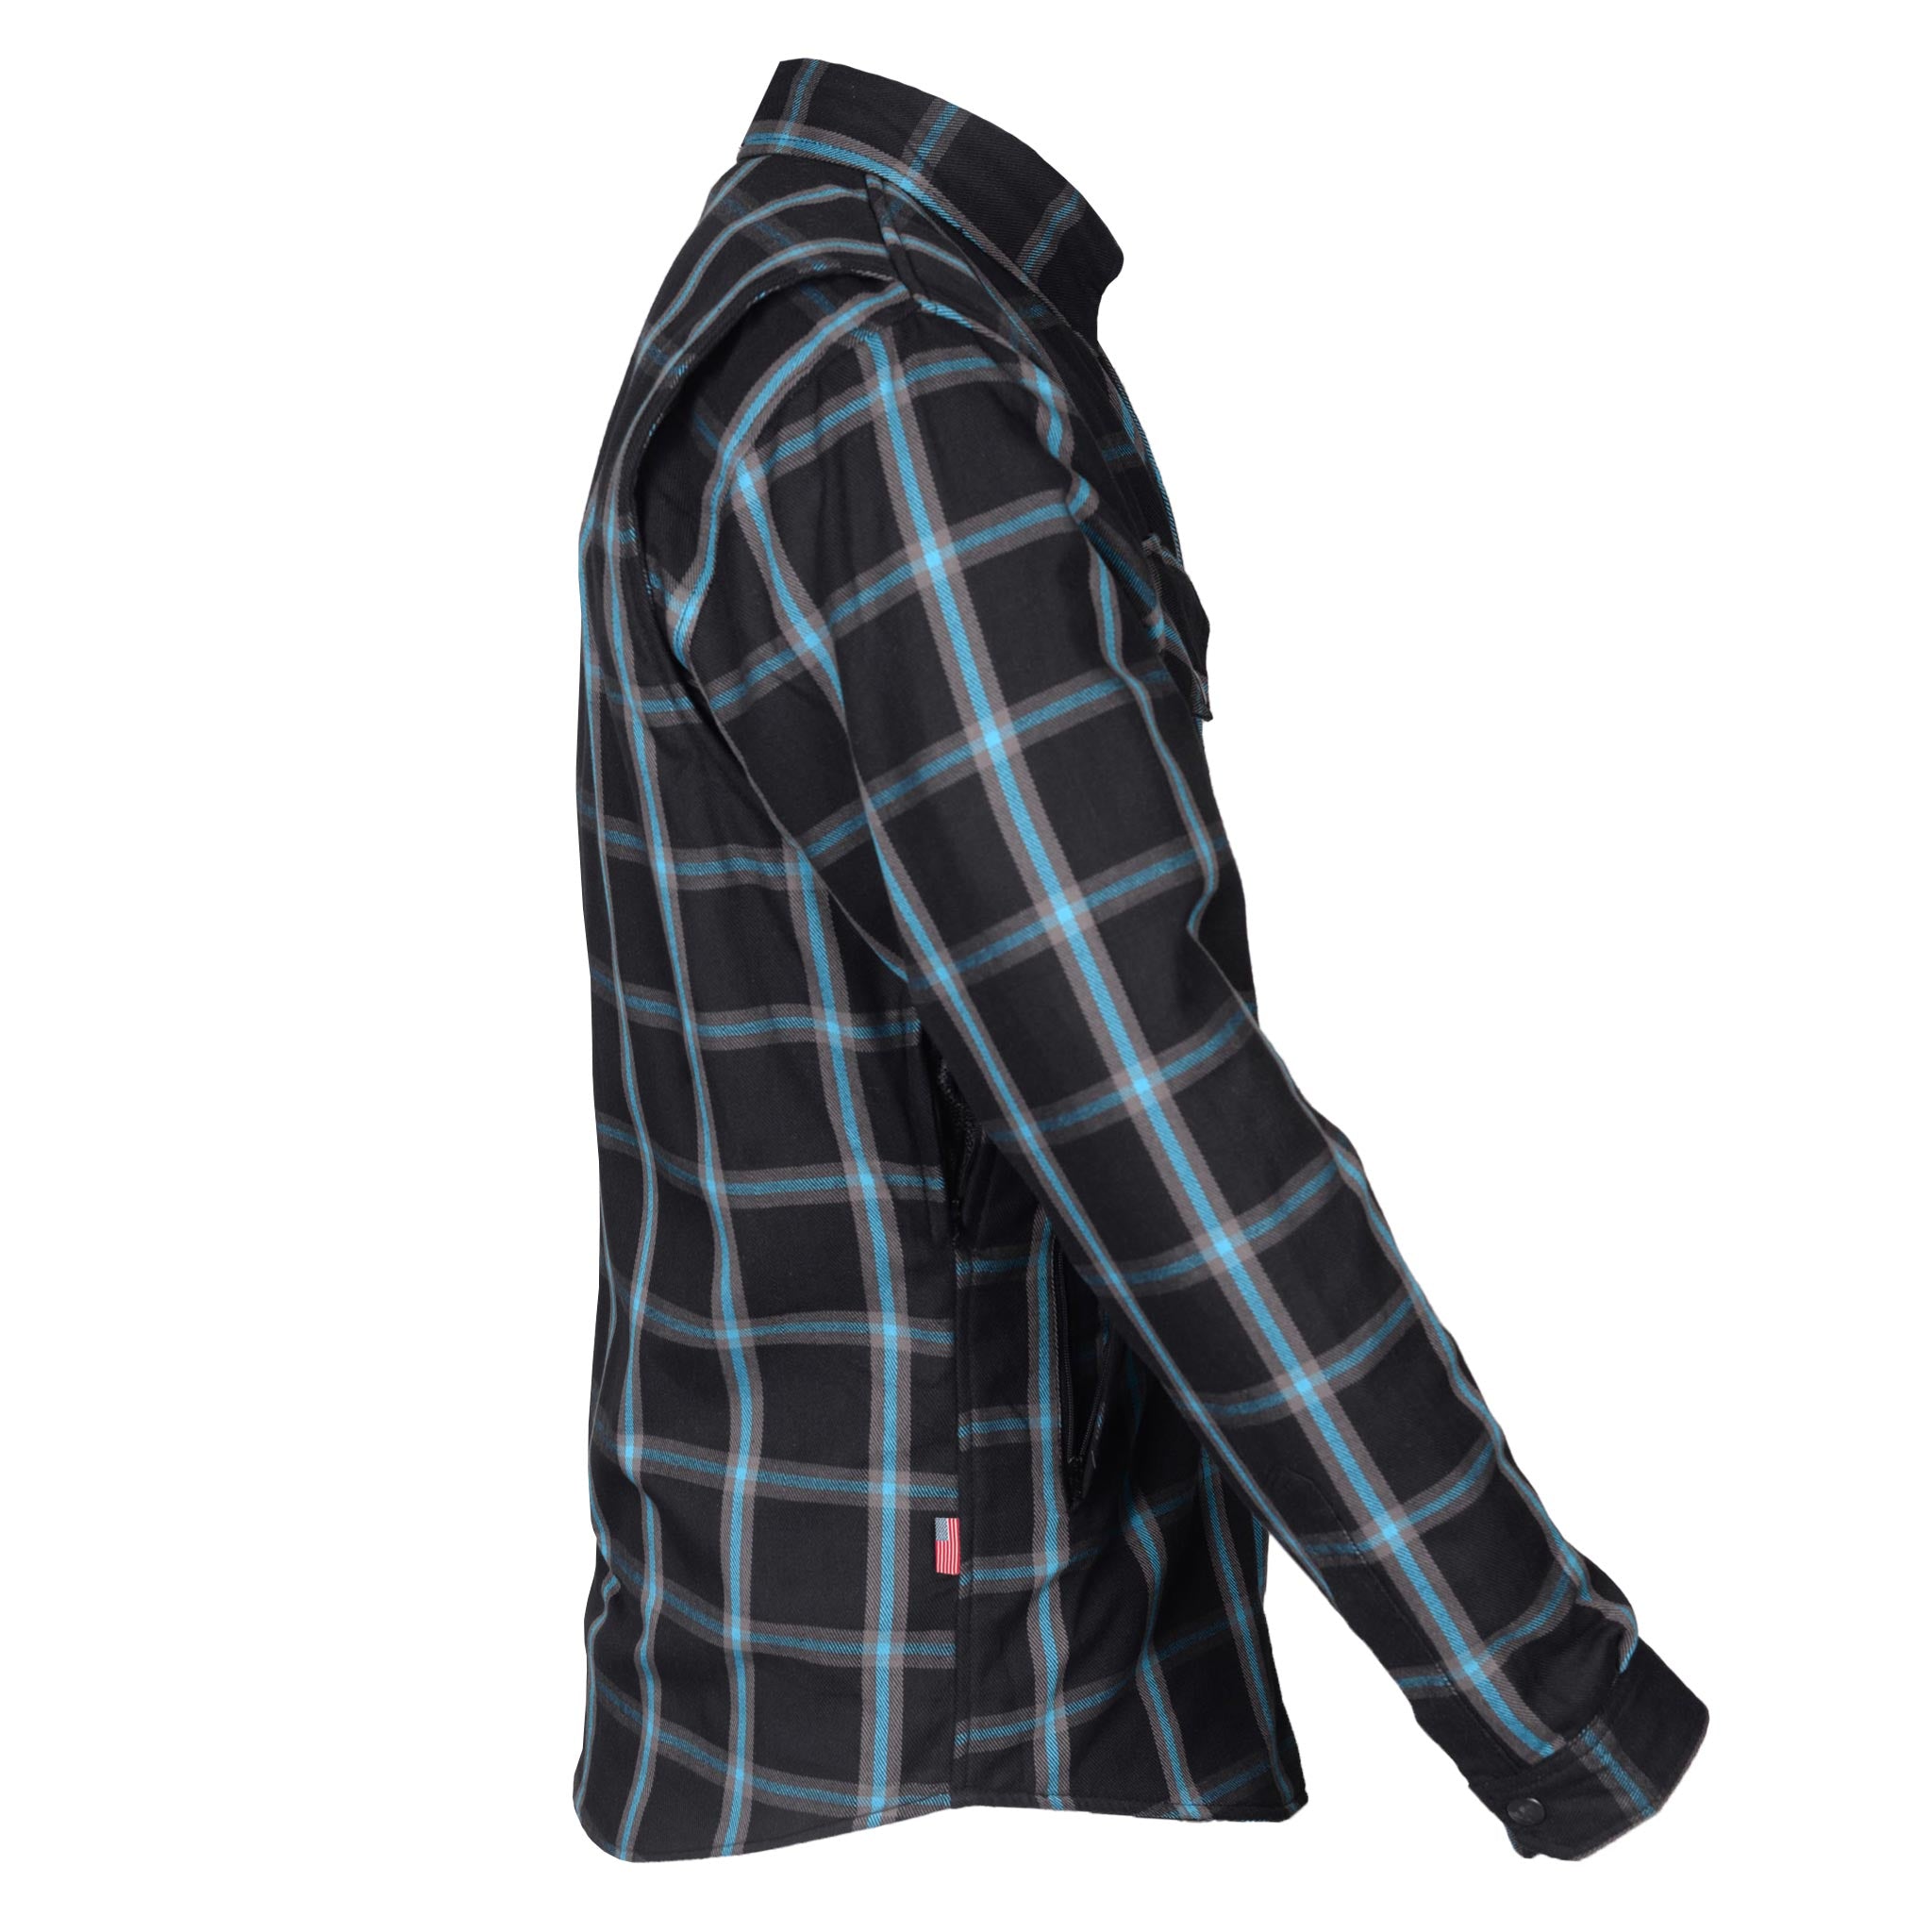 Protective Flannel Shirt "Blue Bypass" - Black & Blue Stripes